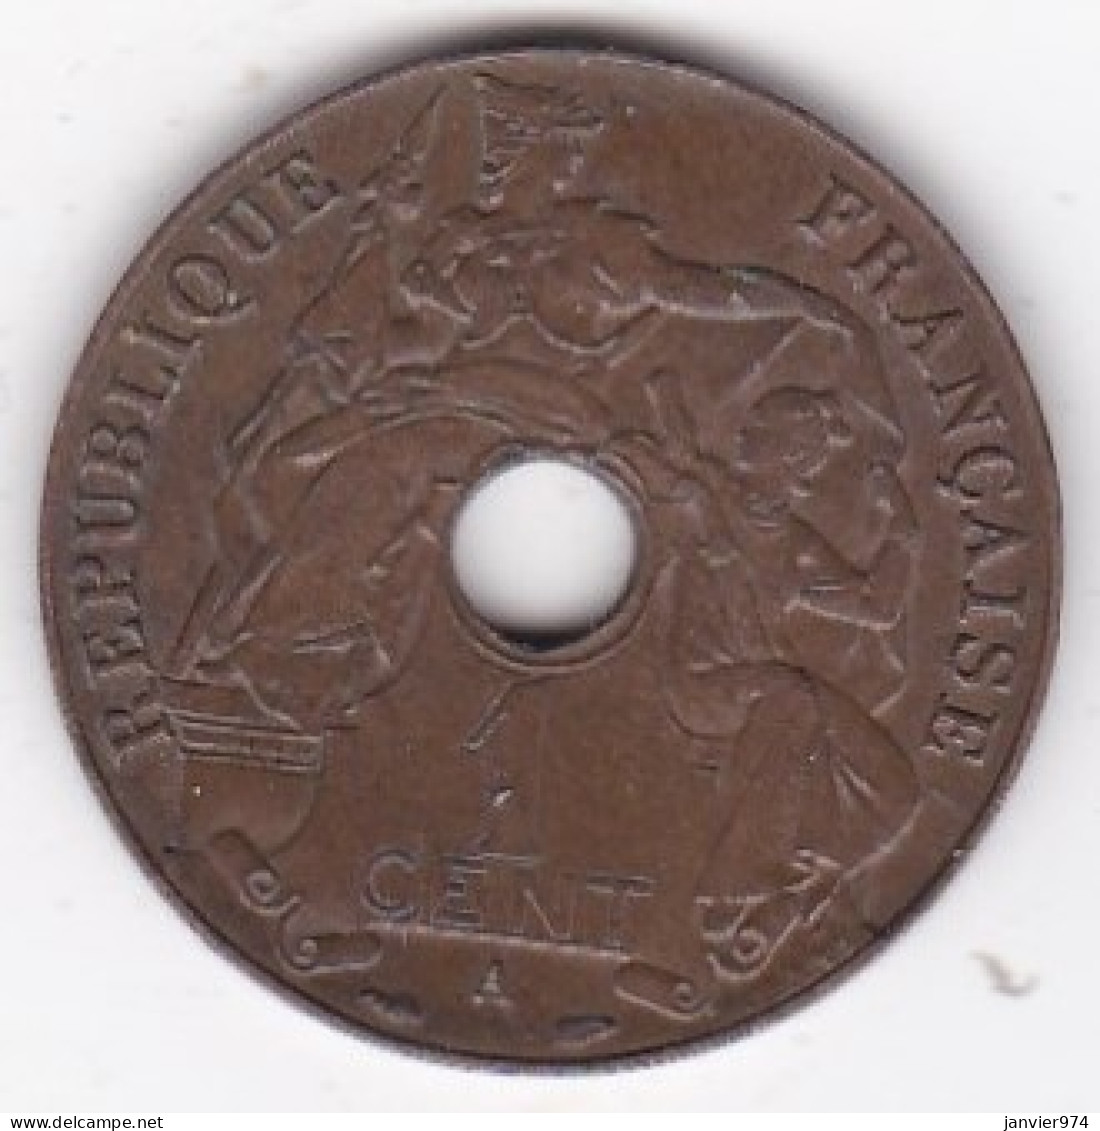 Indochine Française. 1 Cent 1937 A. En Bronze, Lec 98 - French Indochina